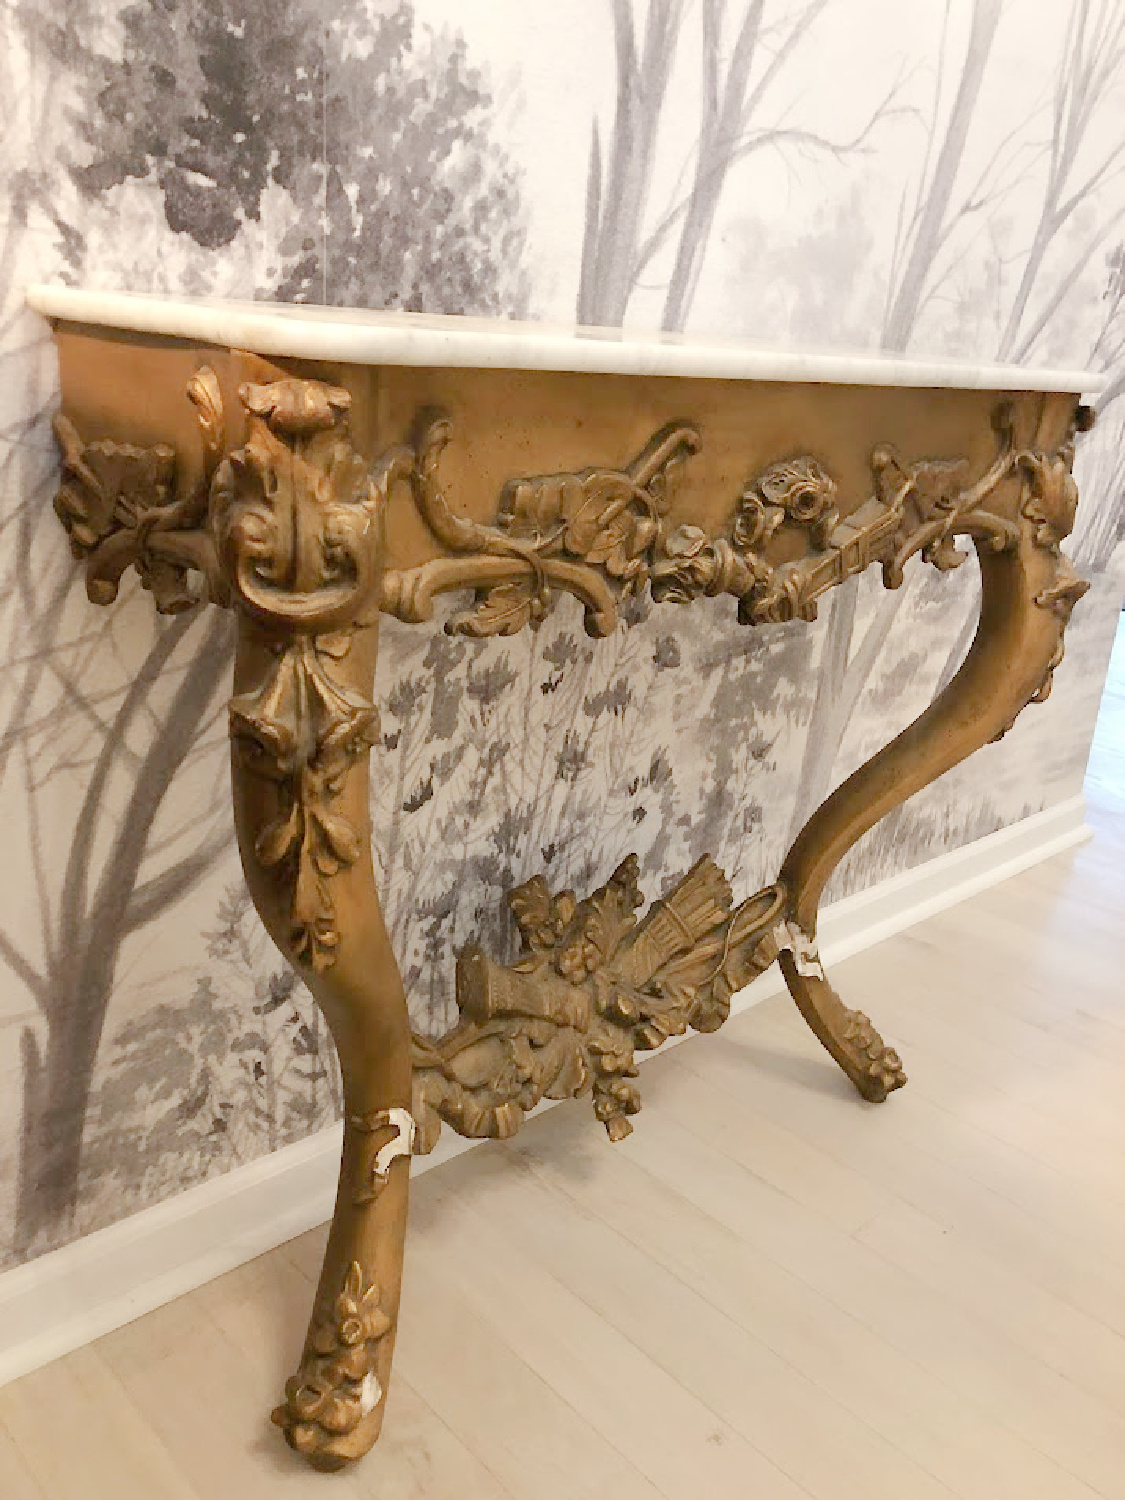 Antique Louis style console from France in our entry with tree scenic wall mural from Photowall - Hello Lovely Studio.